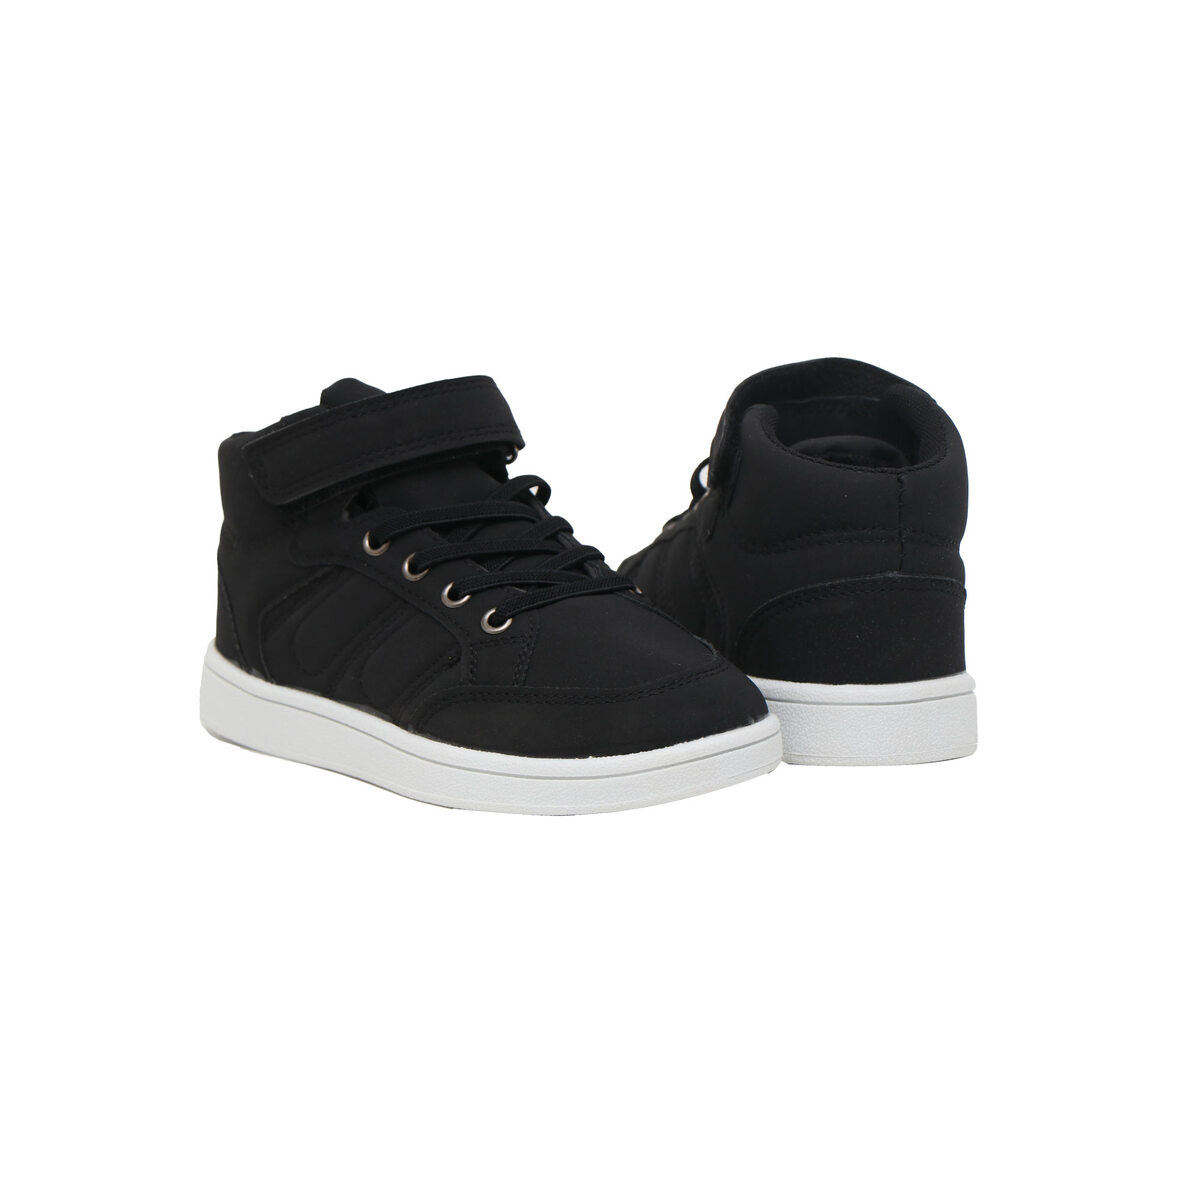 Debackers Boys Boot 1042251, 23 Online at Best Price | Boys shoes ...